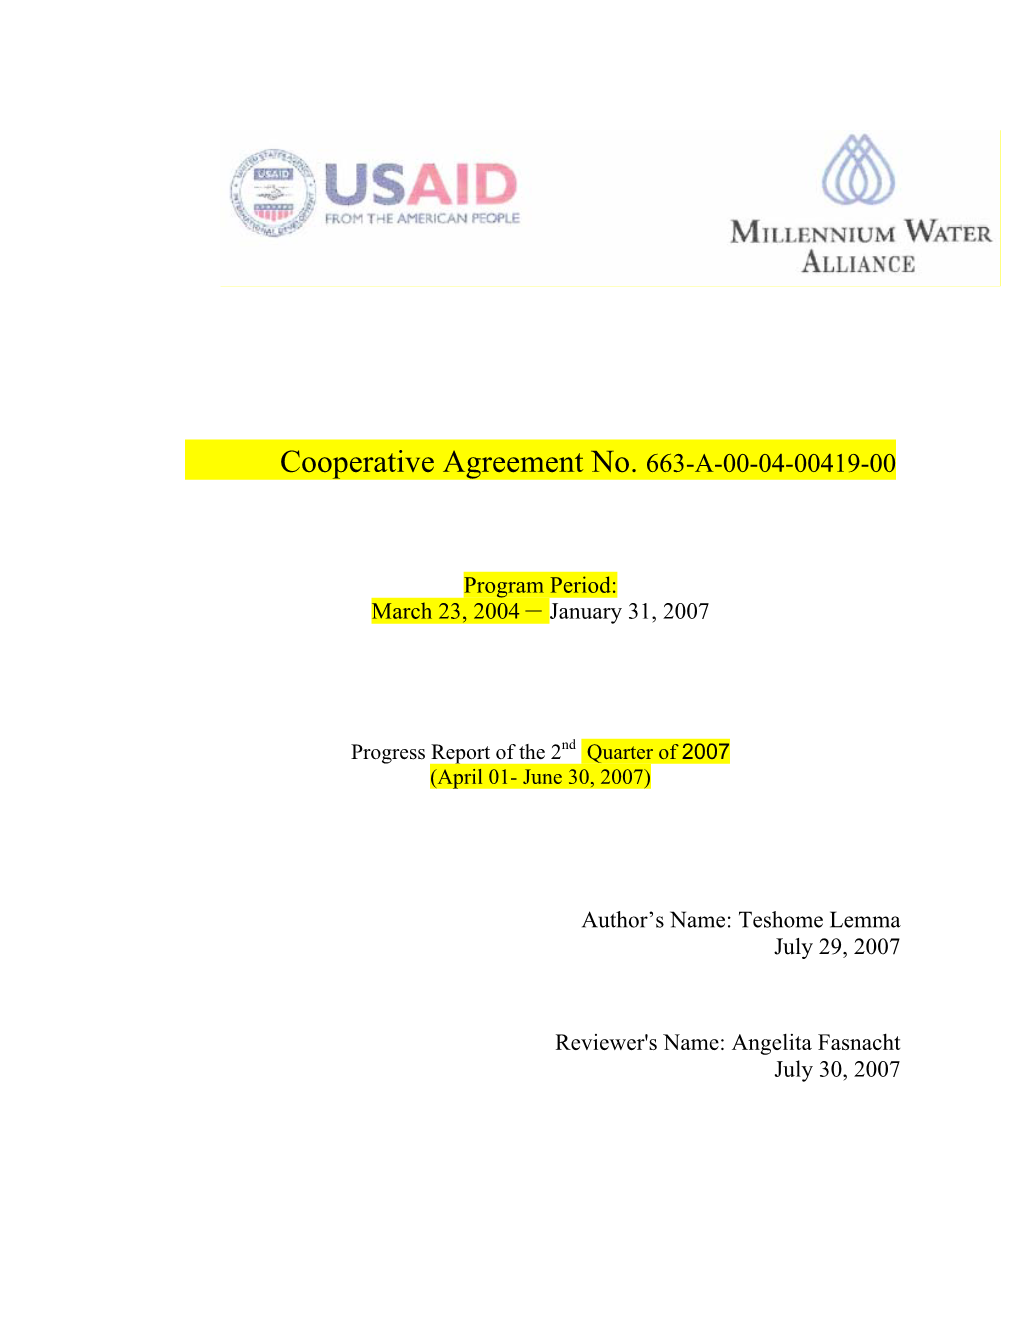 Cooperative Agreement No. 663-A-00-04-00419-00